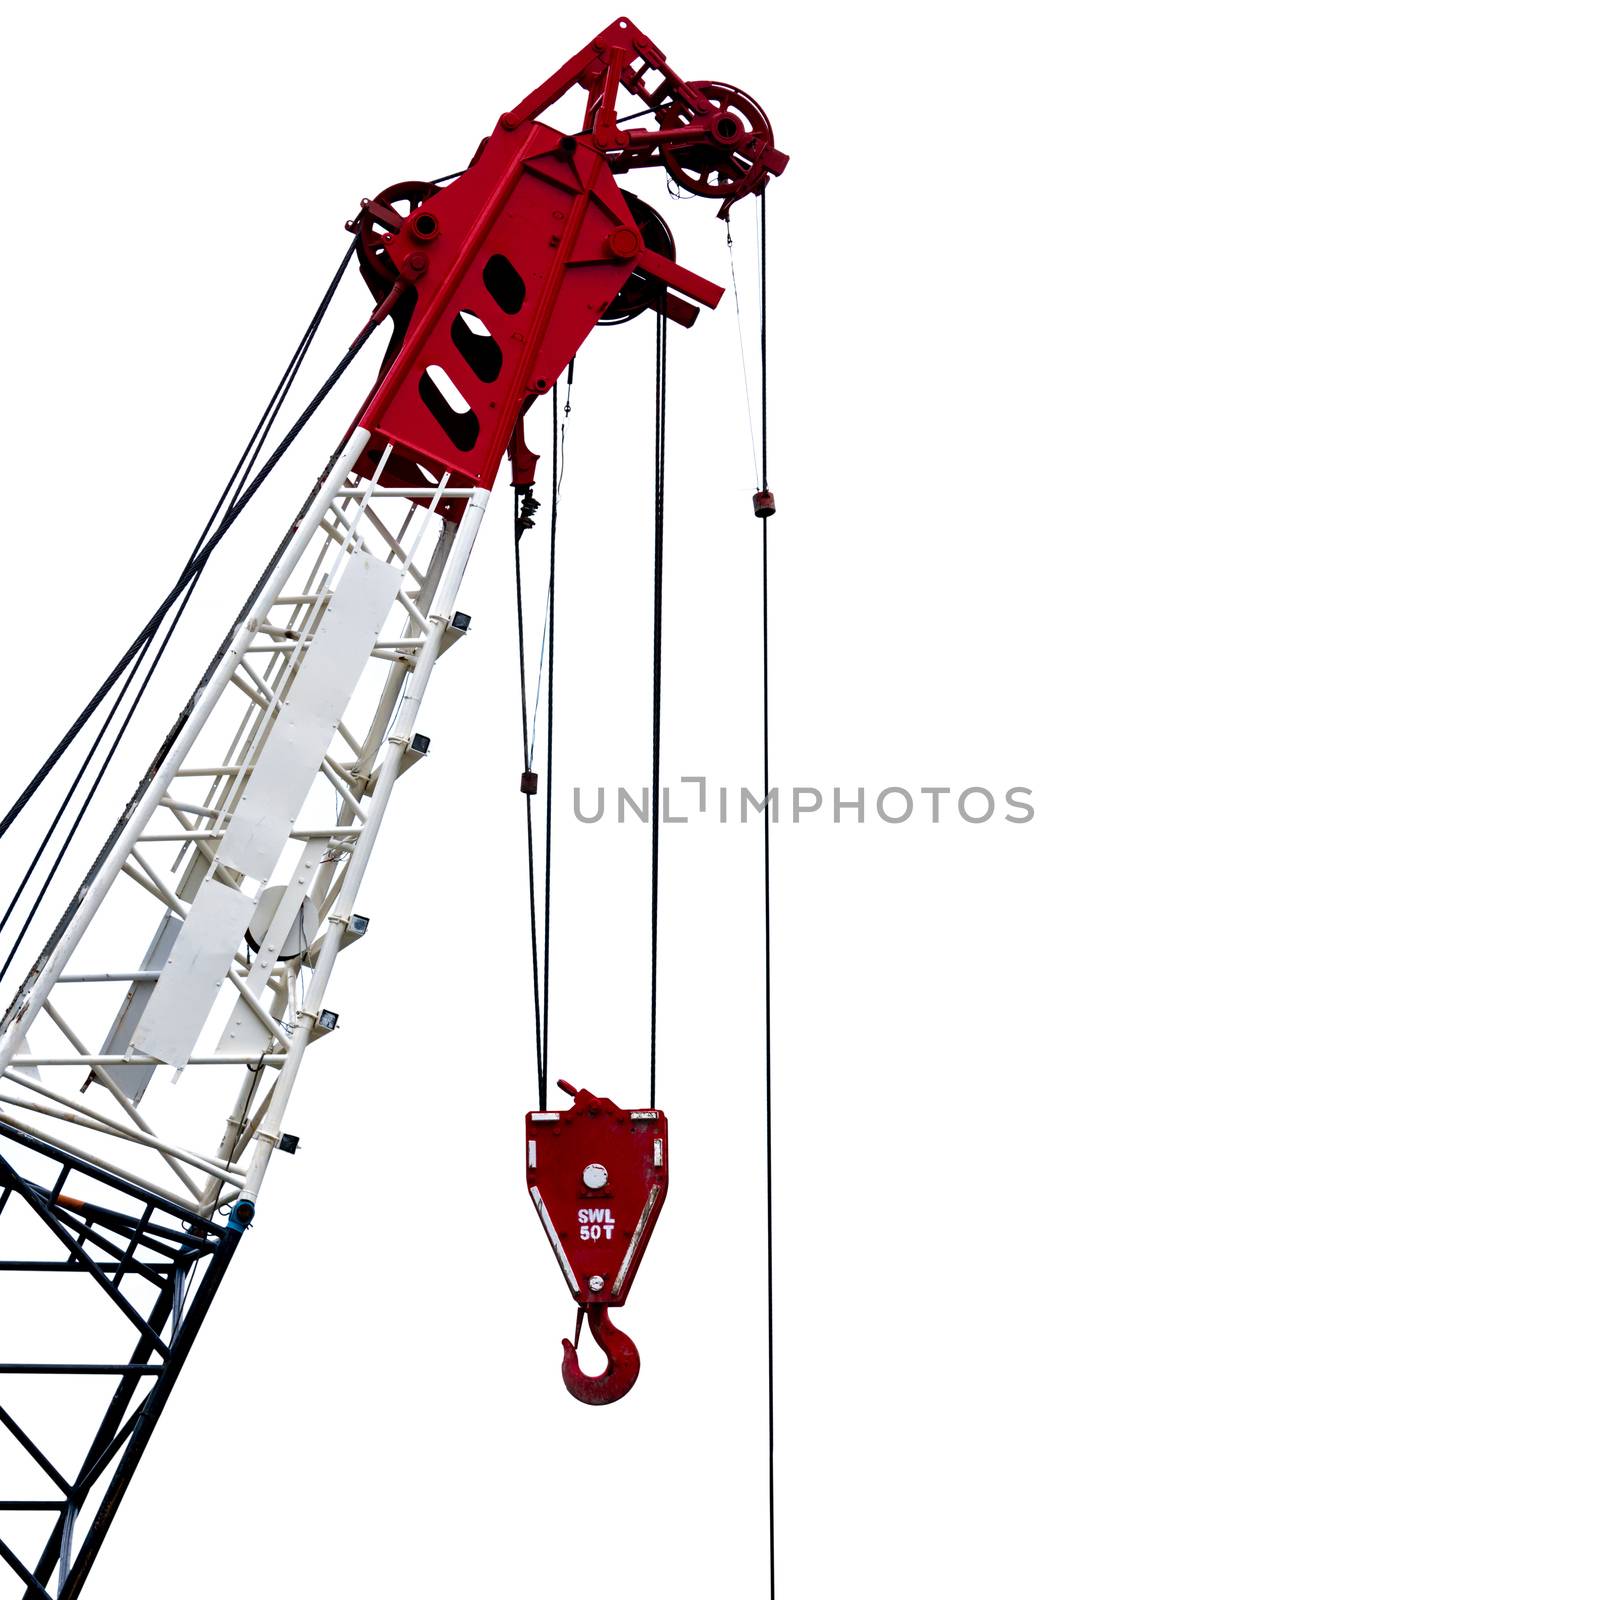 Construction crane for heavy lifting isolated on white backgroun by Fahroni